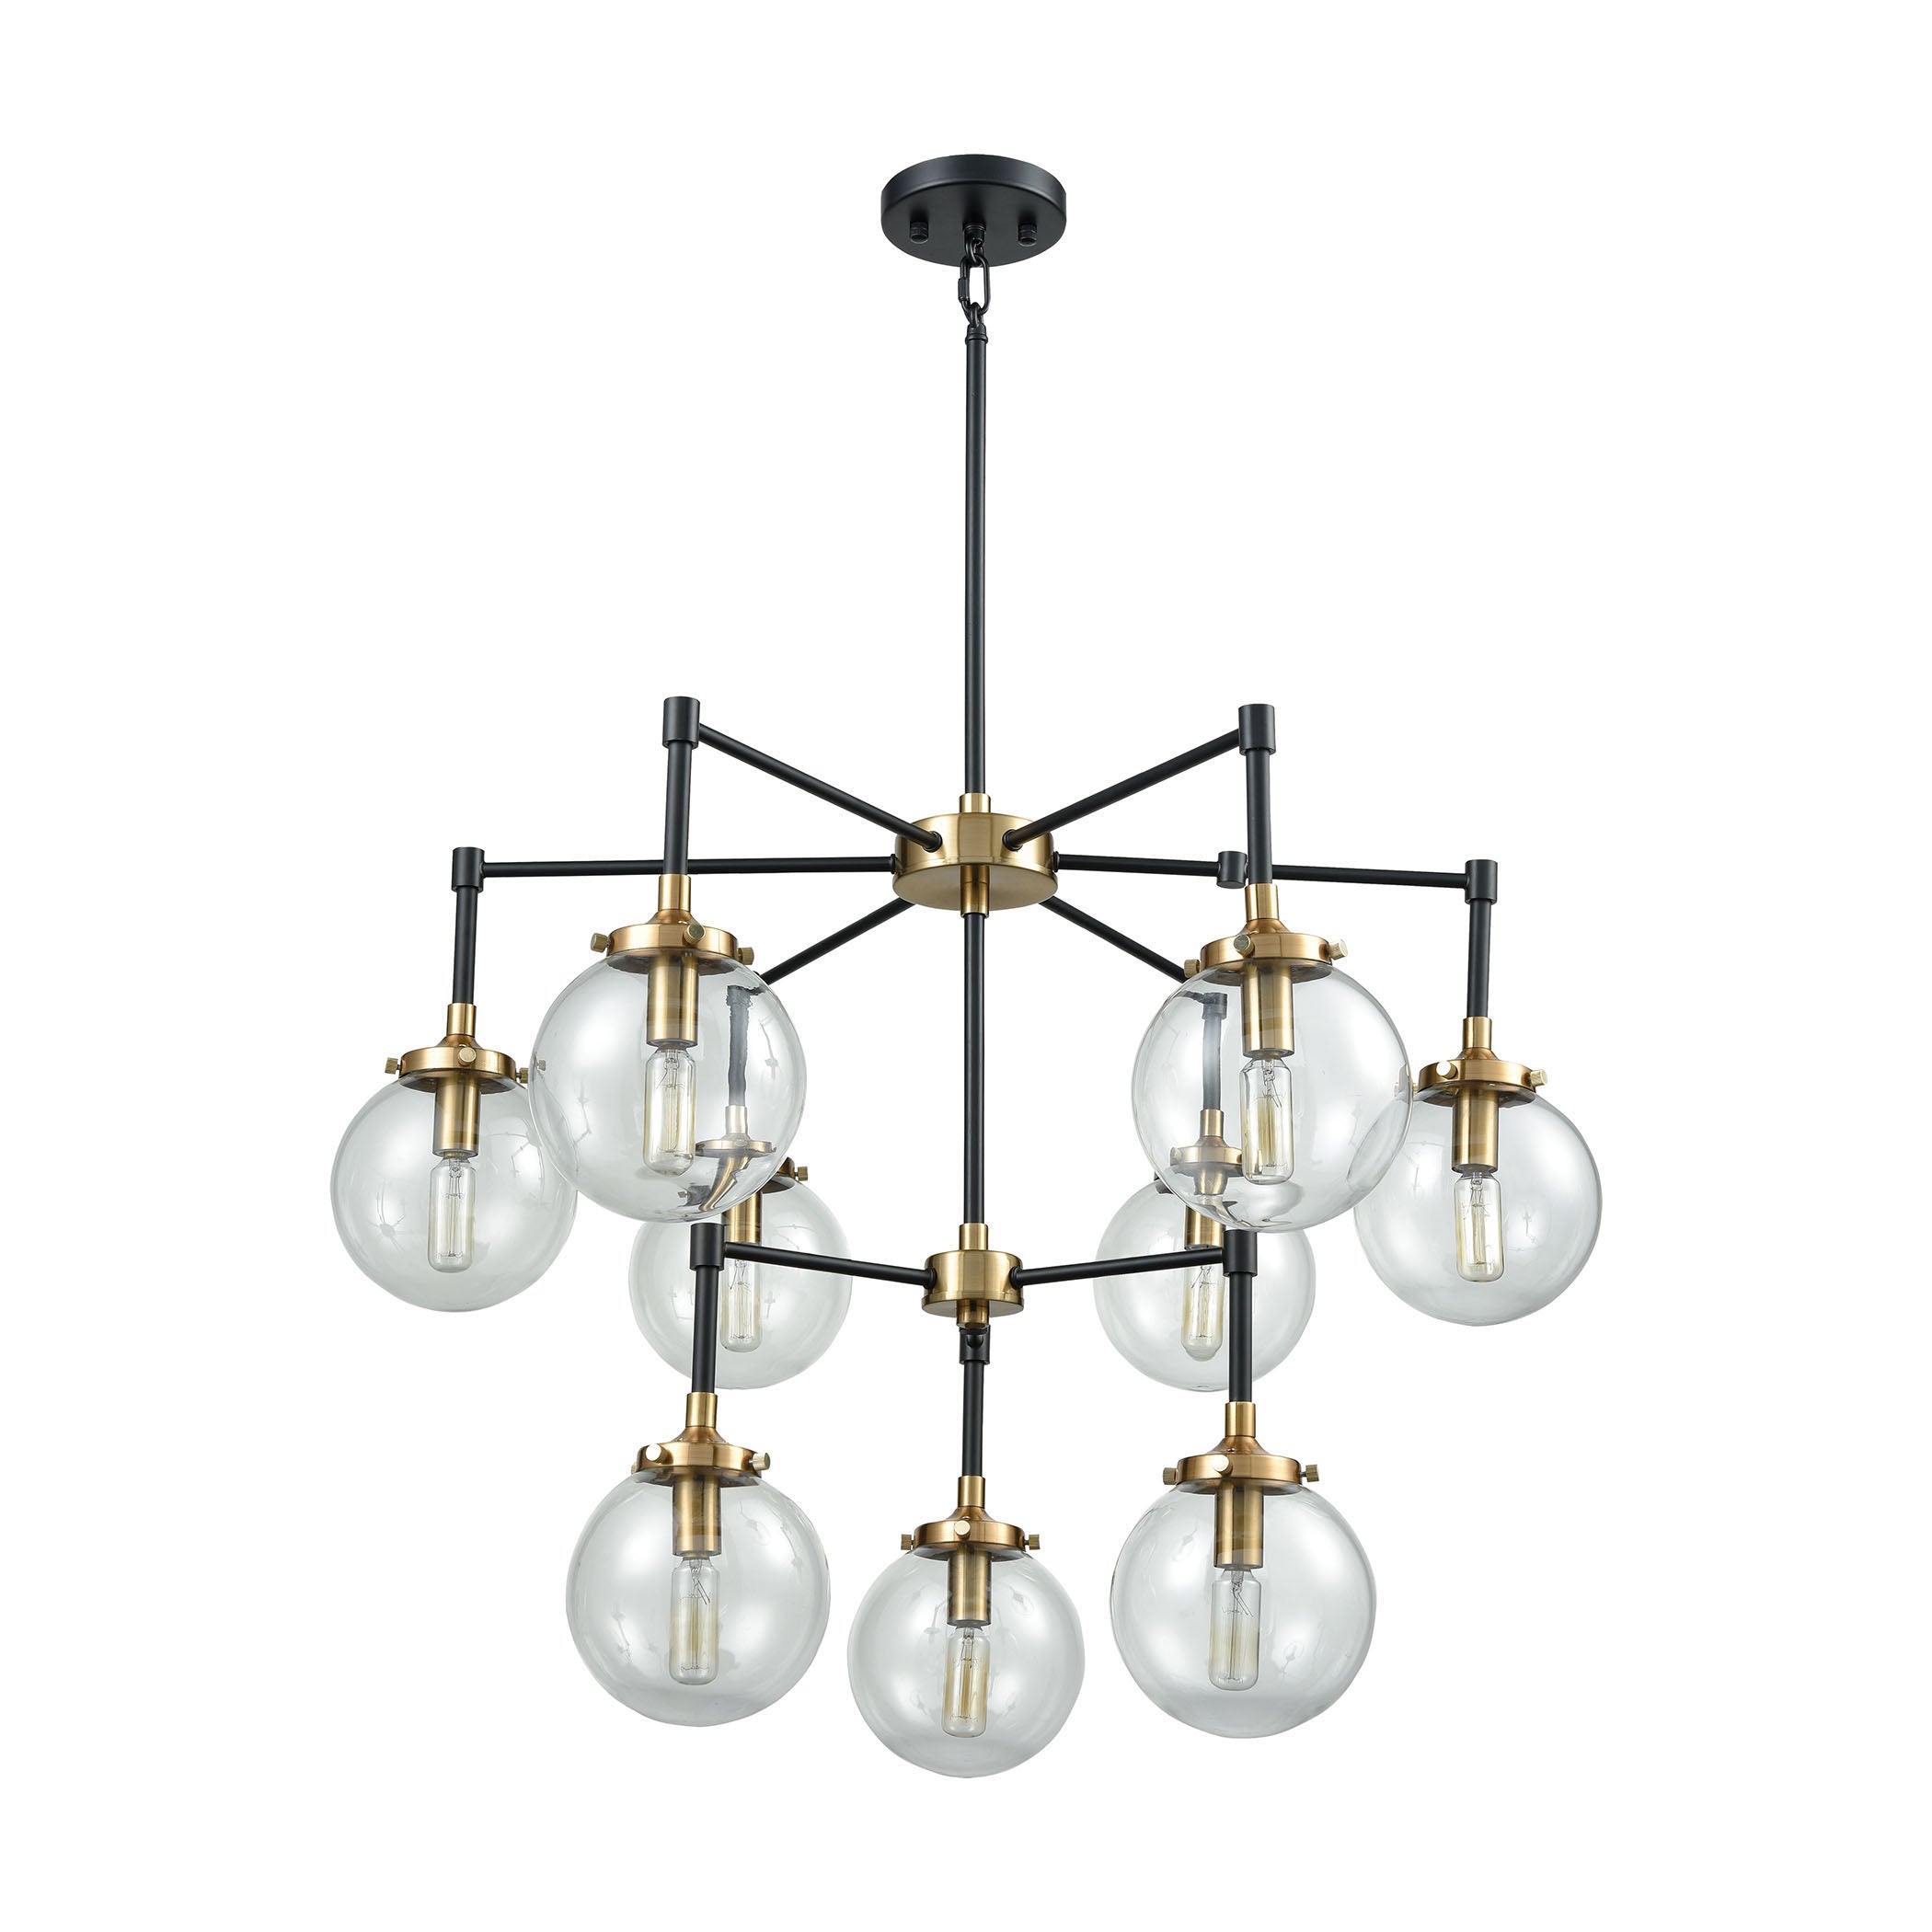 ELK Lighting 14438/6+3 Boudreaux 9-Light Chandelier in Matte Black and Antique Gold with Sphere-shaped Glass